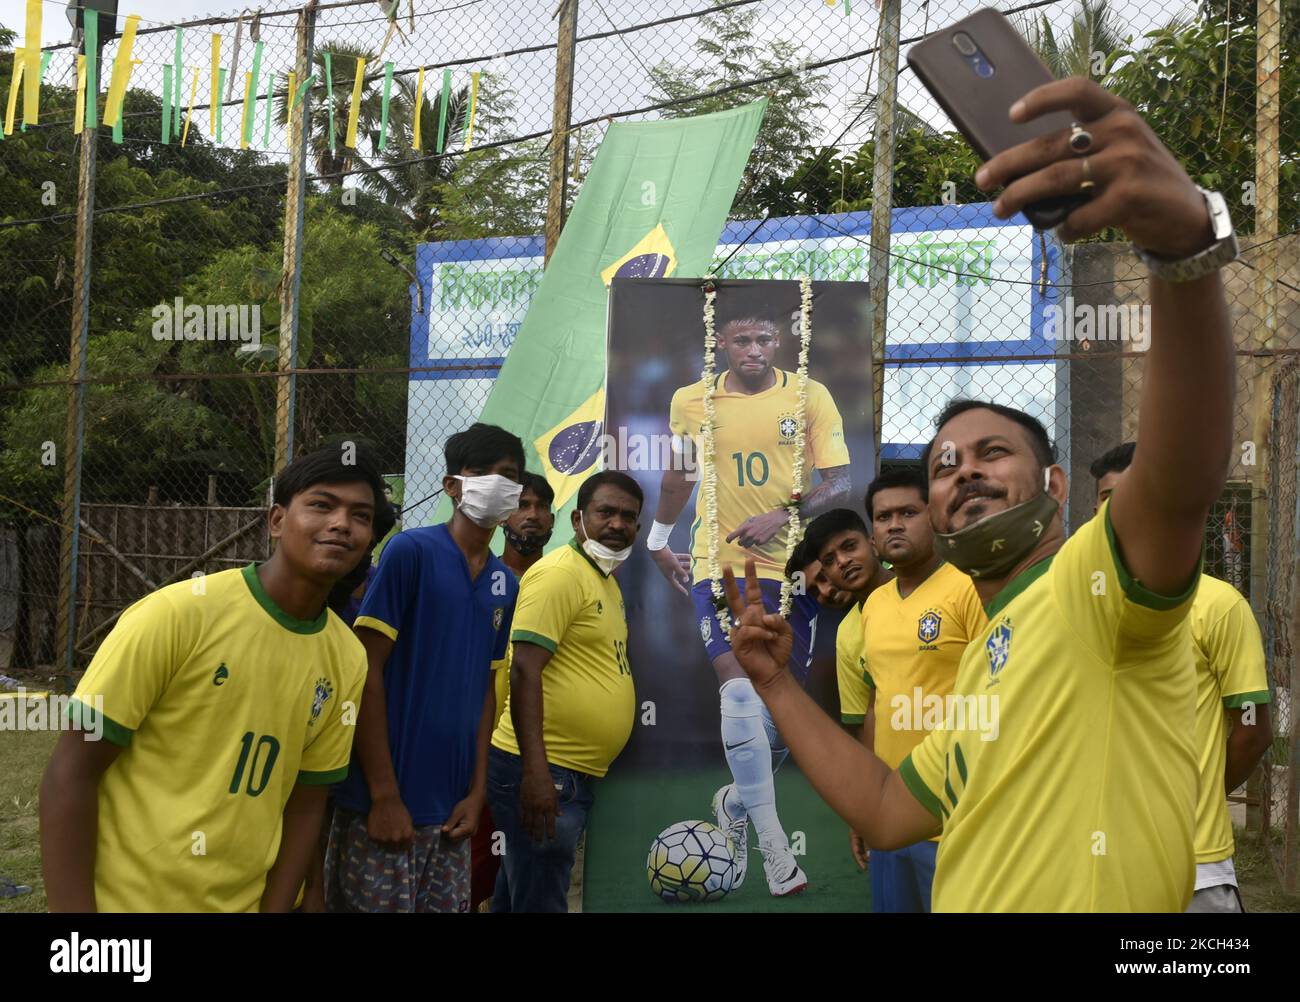 Brazilian takes a selfie picture in front of a photo of Neymar (a professional footballer) ahead of the Copa America final match between Argentina and Brazil, Kolkata, India, 10 July, 2021. (Photo by Indranil Aditya/NurPhoto) Stock Photo